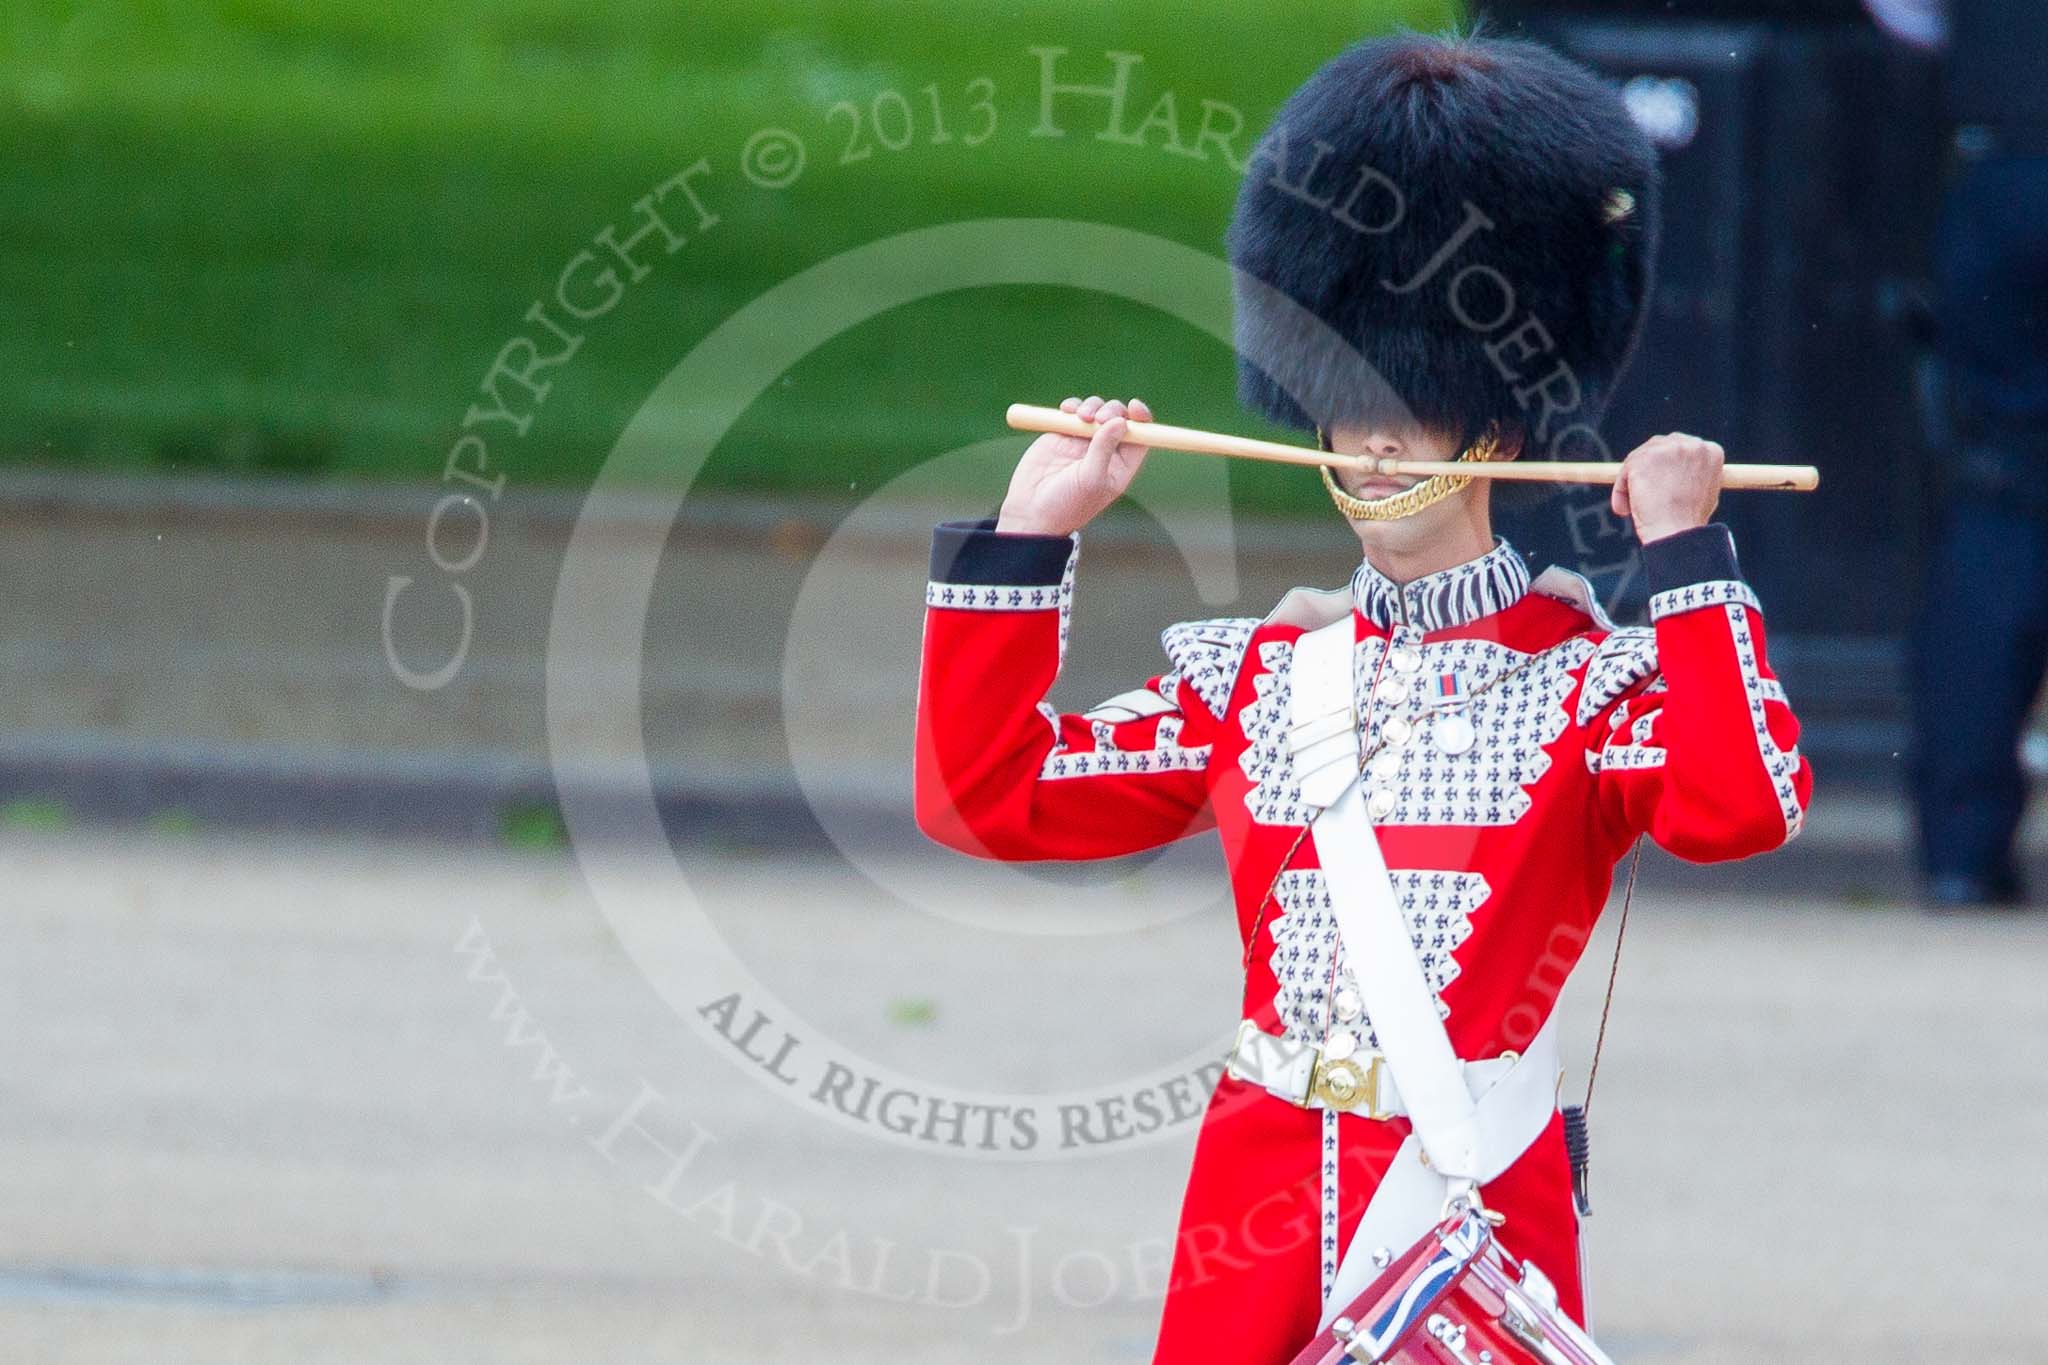 Trooping the Colour 2013: The "Lone Drummer", Lance Corporal Christopher Rees, salutes with his drumsticks before re-joining the band. Image #428, 15 June 2013 11:16 Horse Guards Parade, London, UK